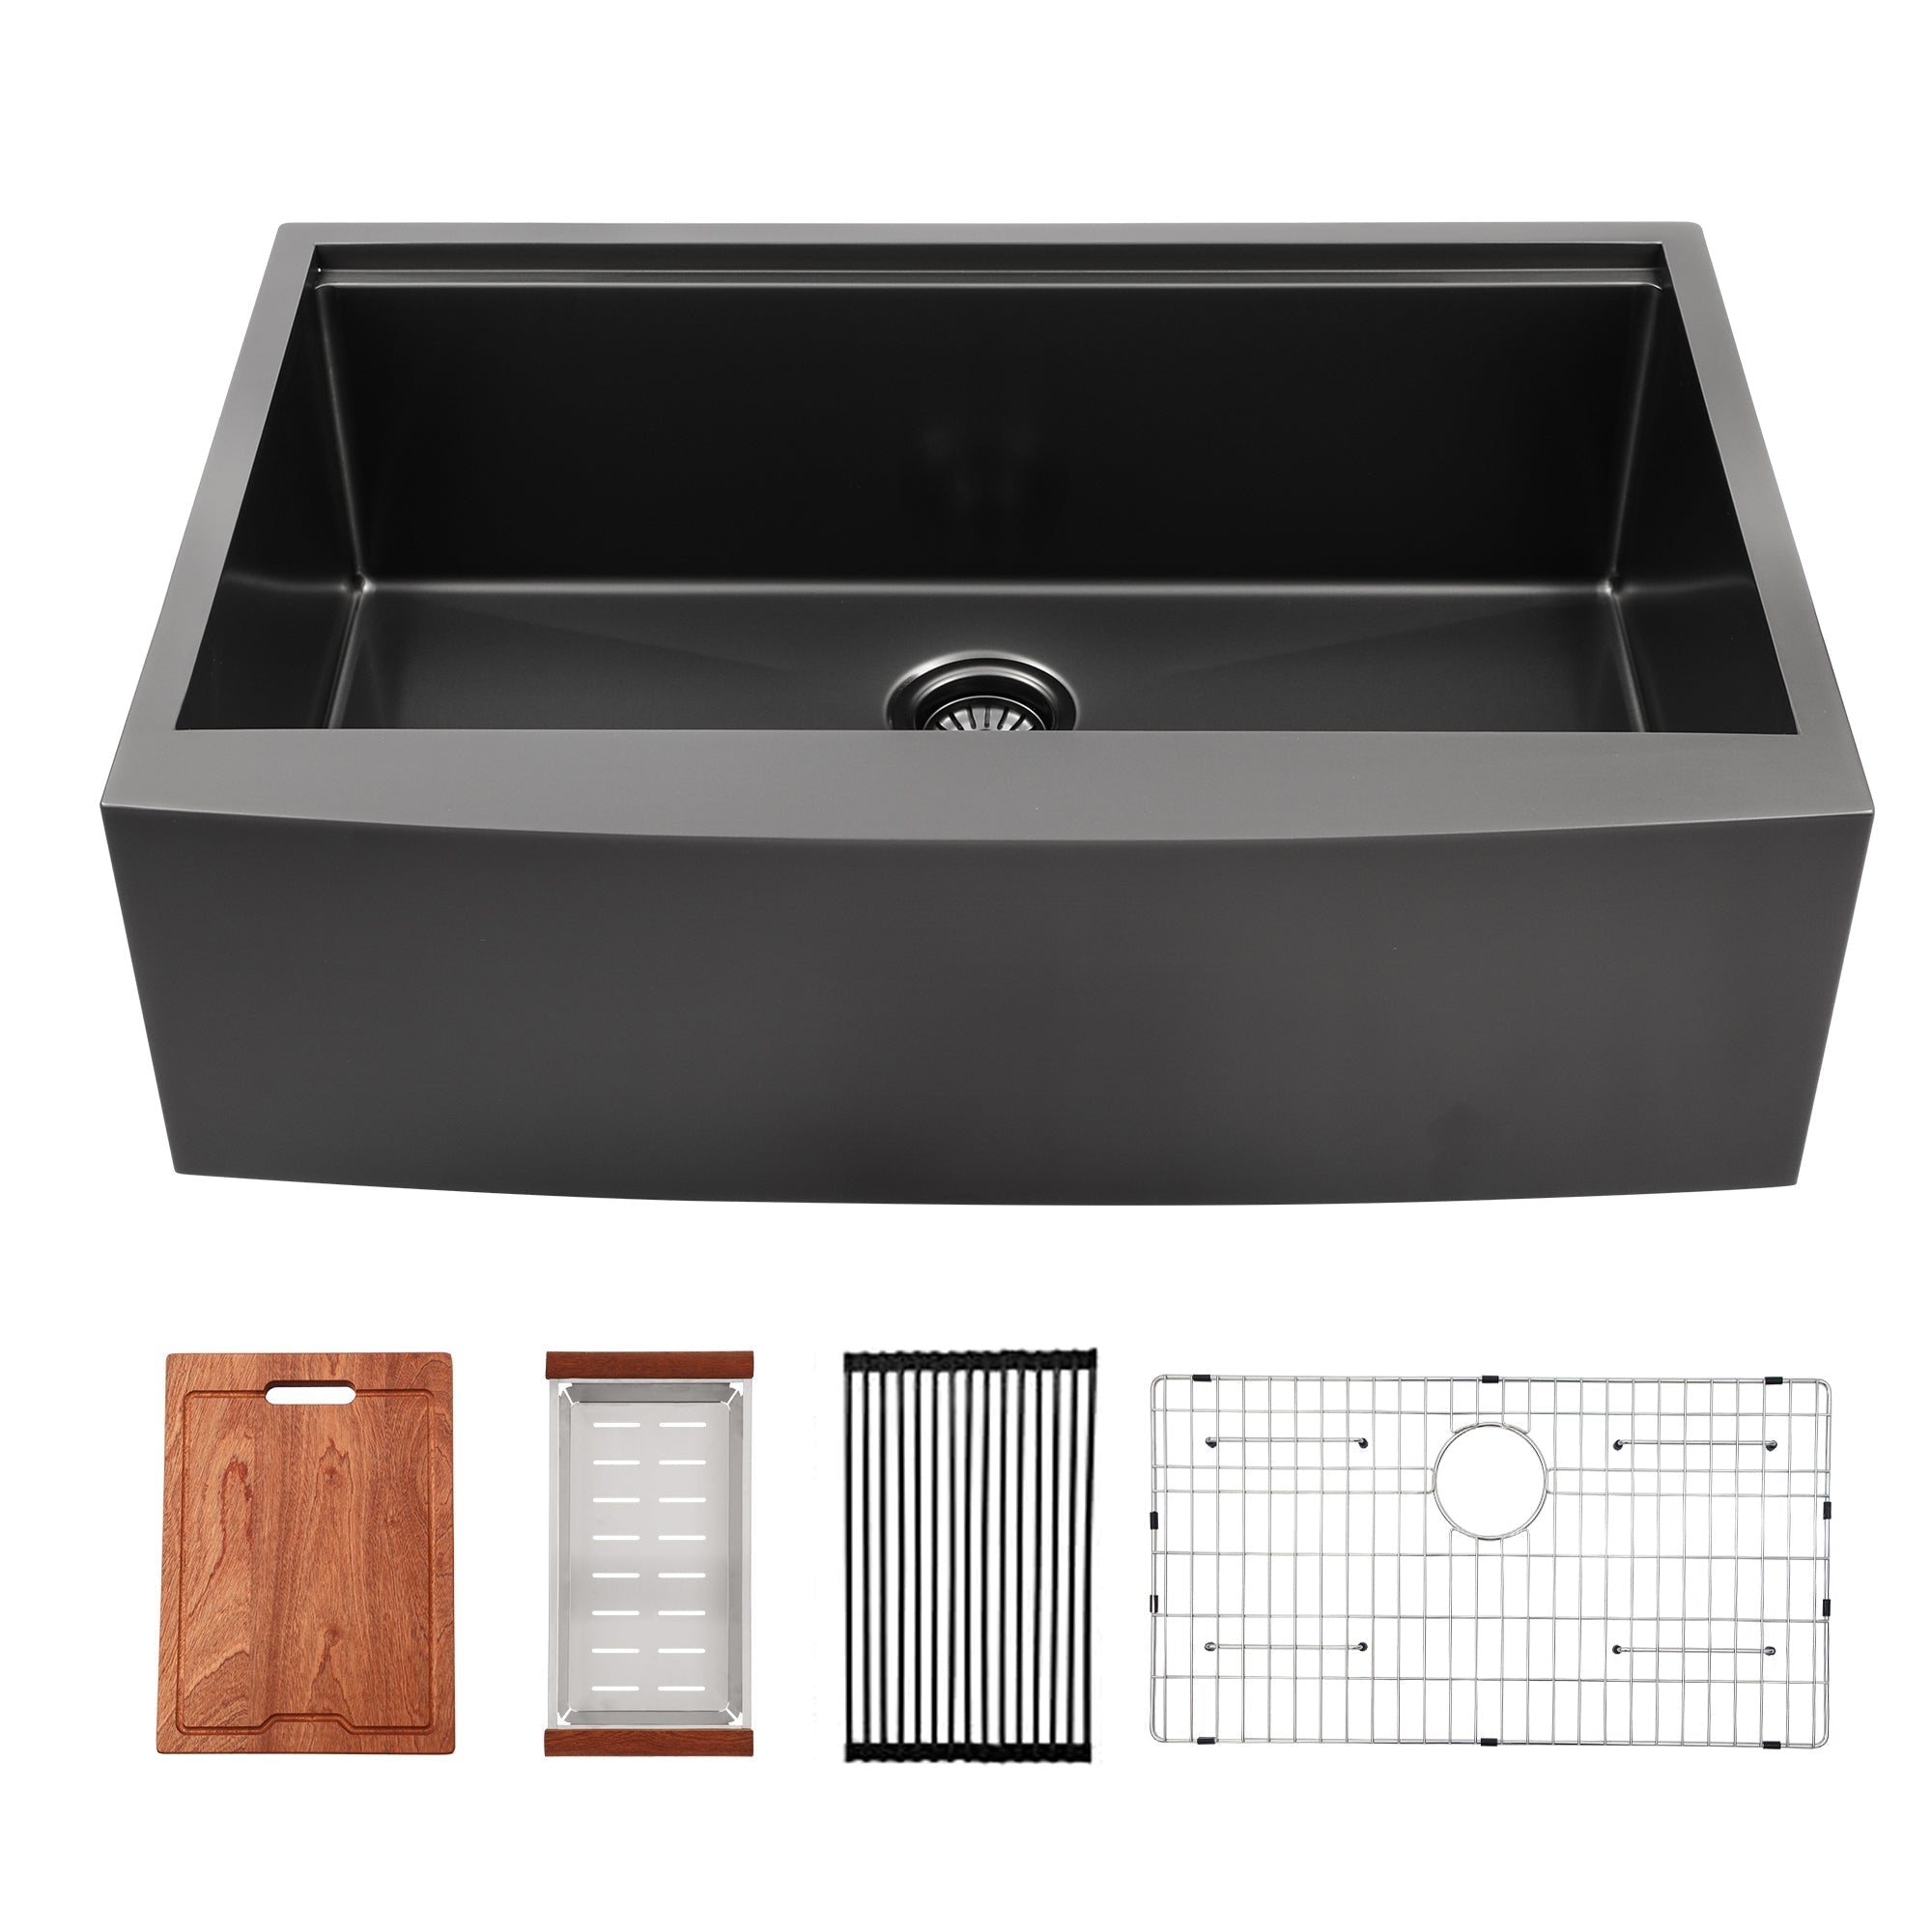 33in W x 22in D Farmhouse Kitchen Sink Workstation Sink with Cutting Board Apron Front from Lordear